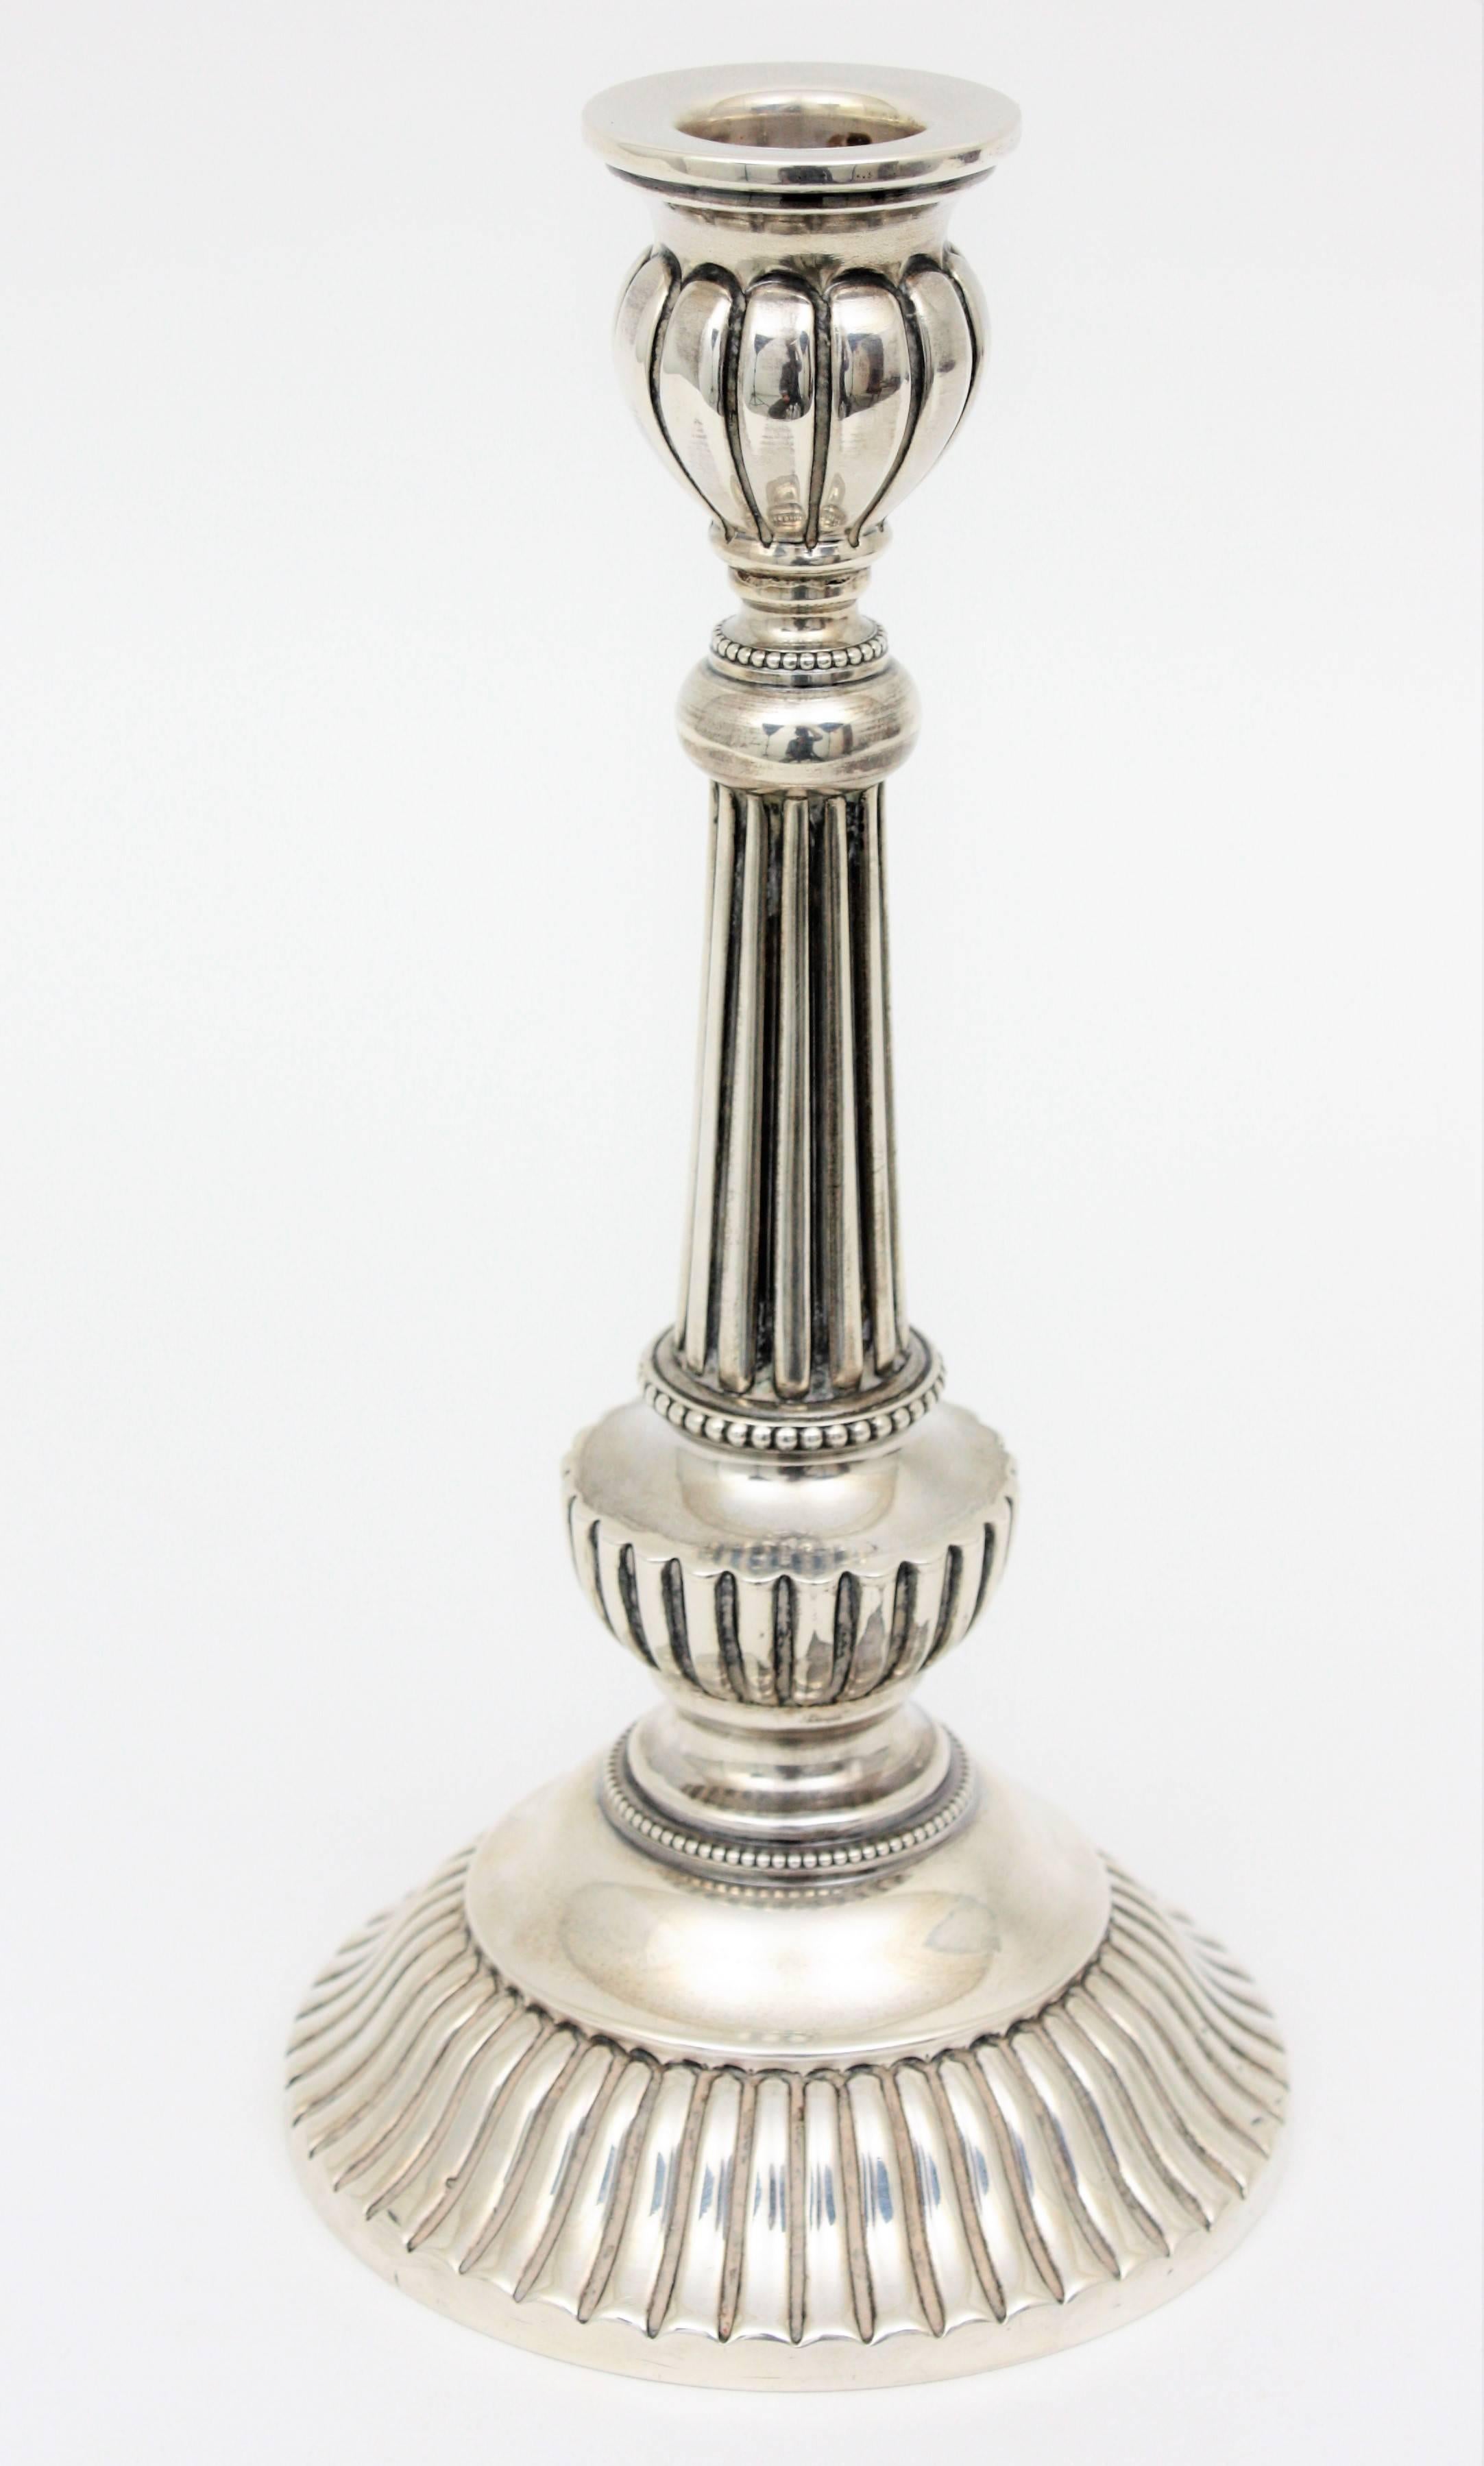 1940s Spanish Louis XVI Style Sterling Silver Candlestick
Louis XVI sterling silver candleholder.
Stamps: Star-940.
Dimensions: Height 22.5 cm x diameter: 11 cm
Spain, 1950s-1960s.

Perfect as a gift idea!